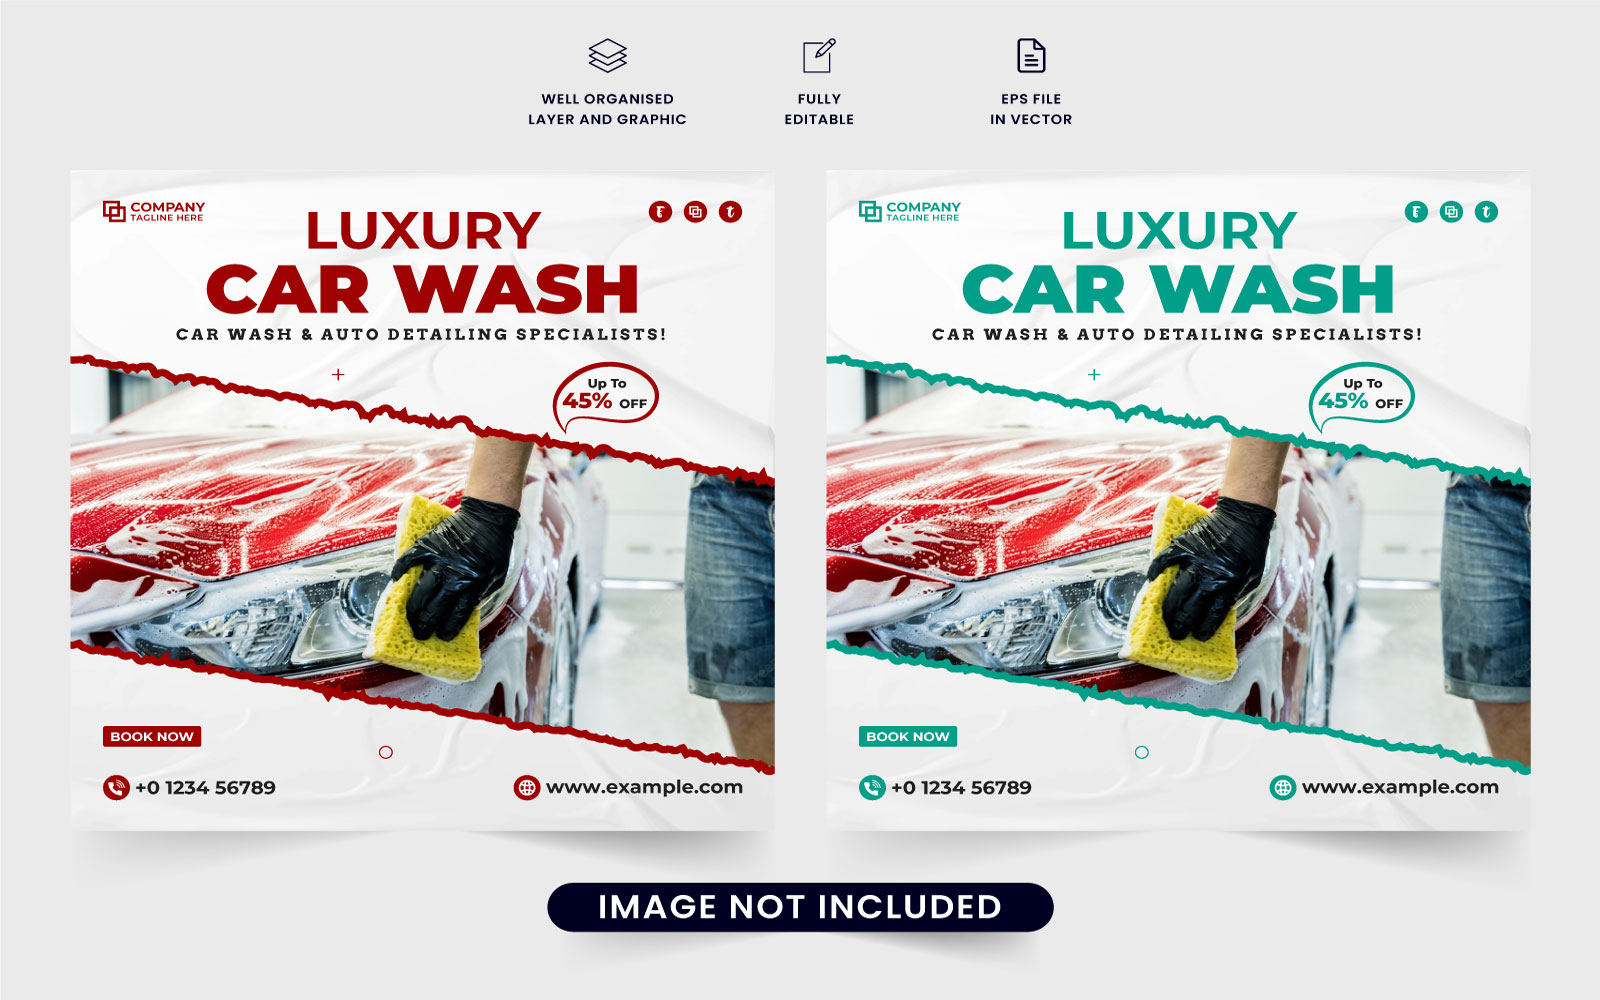 Vehicle washing service template vector